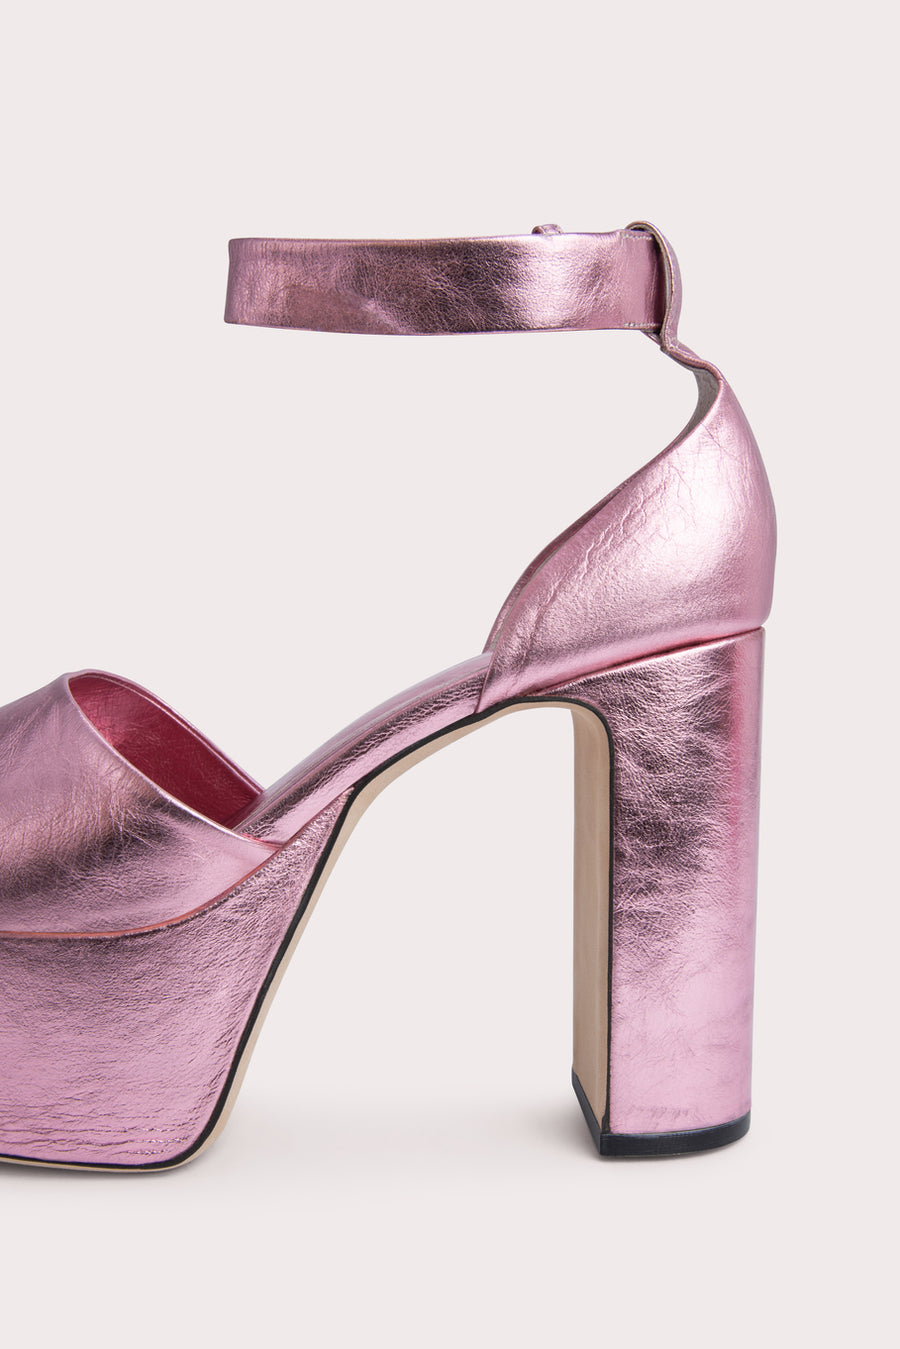 The 'Barb' platform pump. Standing tall on a 12cm block heel in metallic leather. Rounded toe, adjustable ankle strap. 